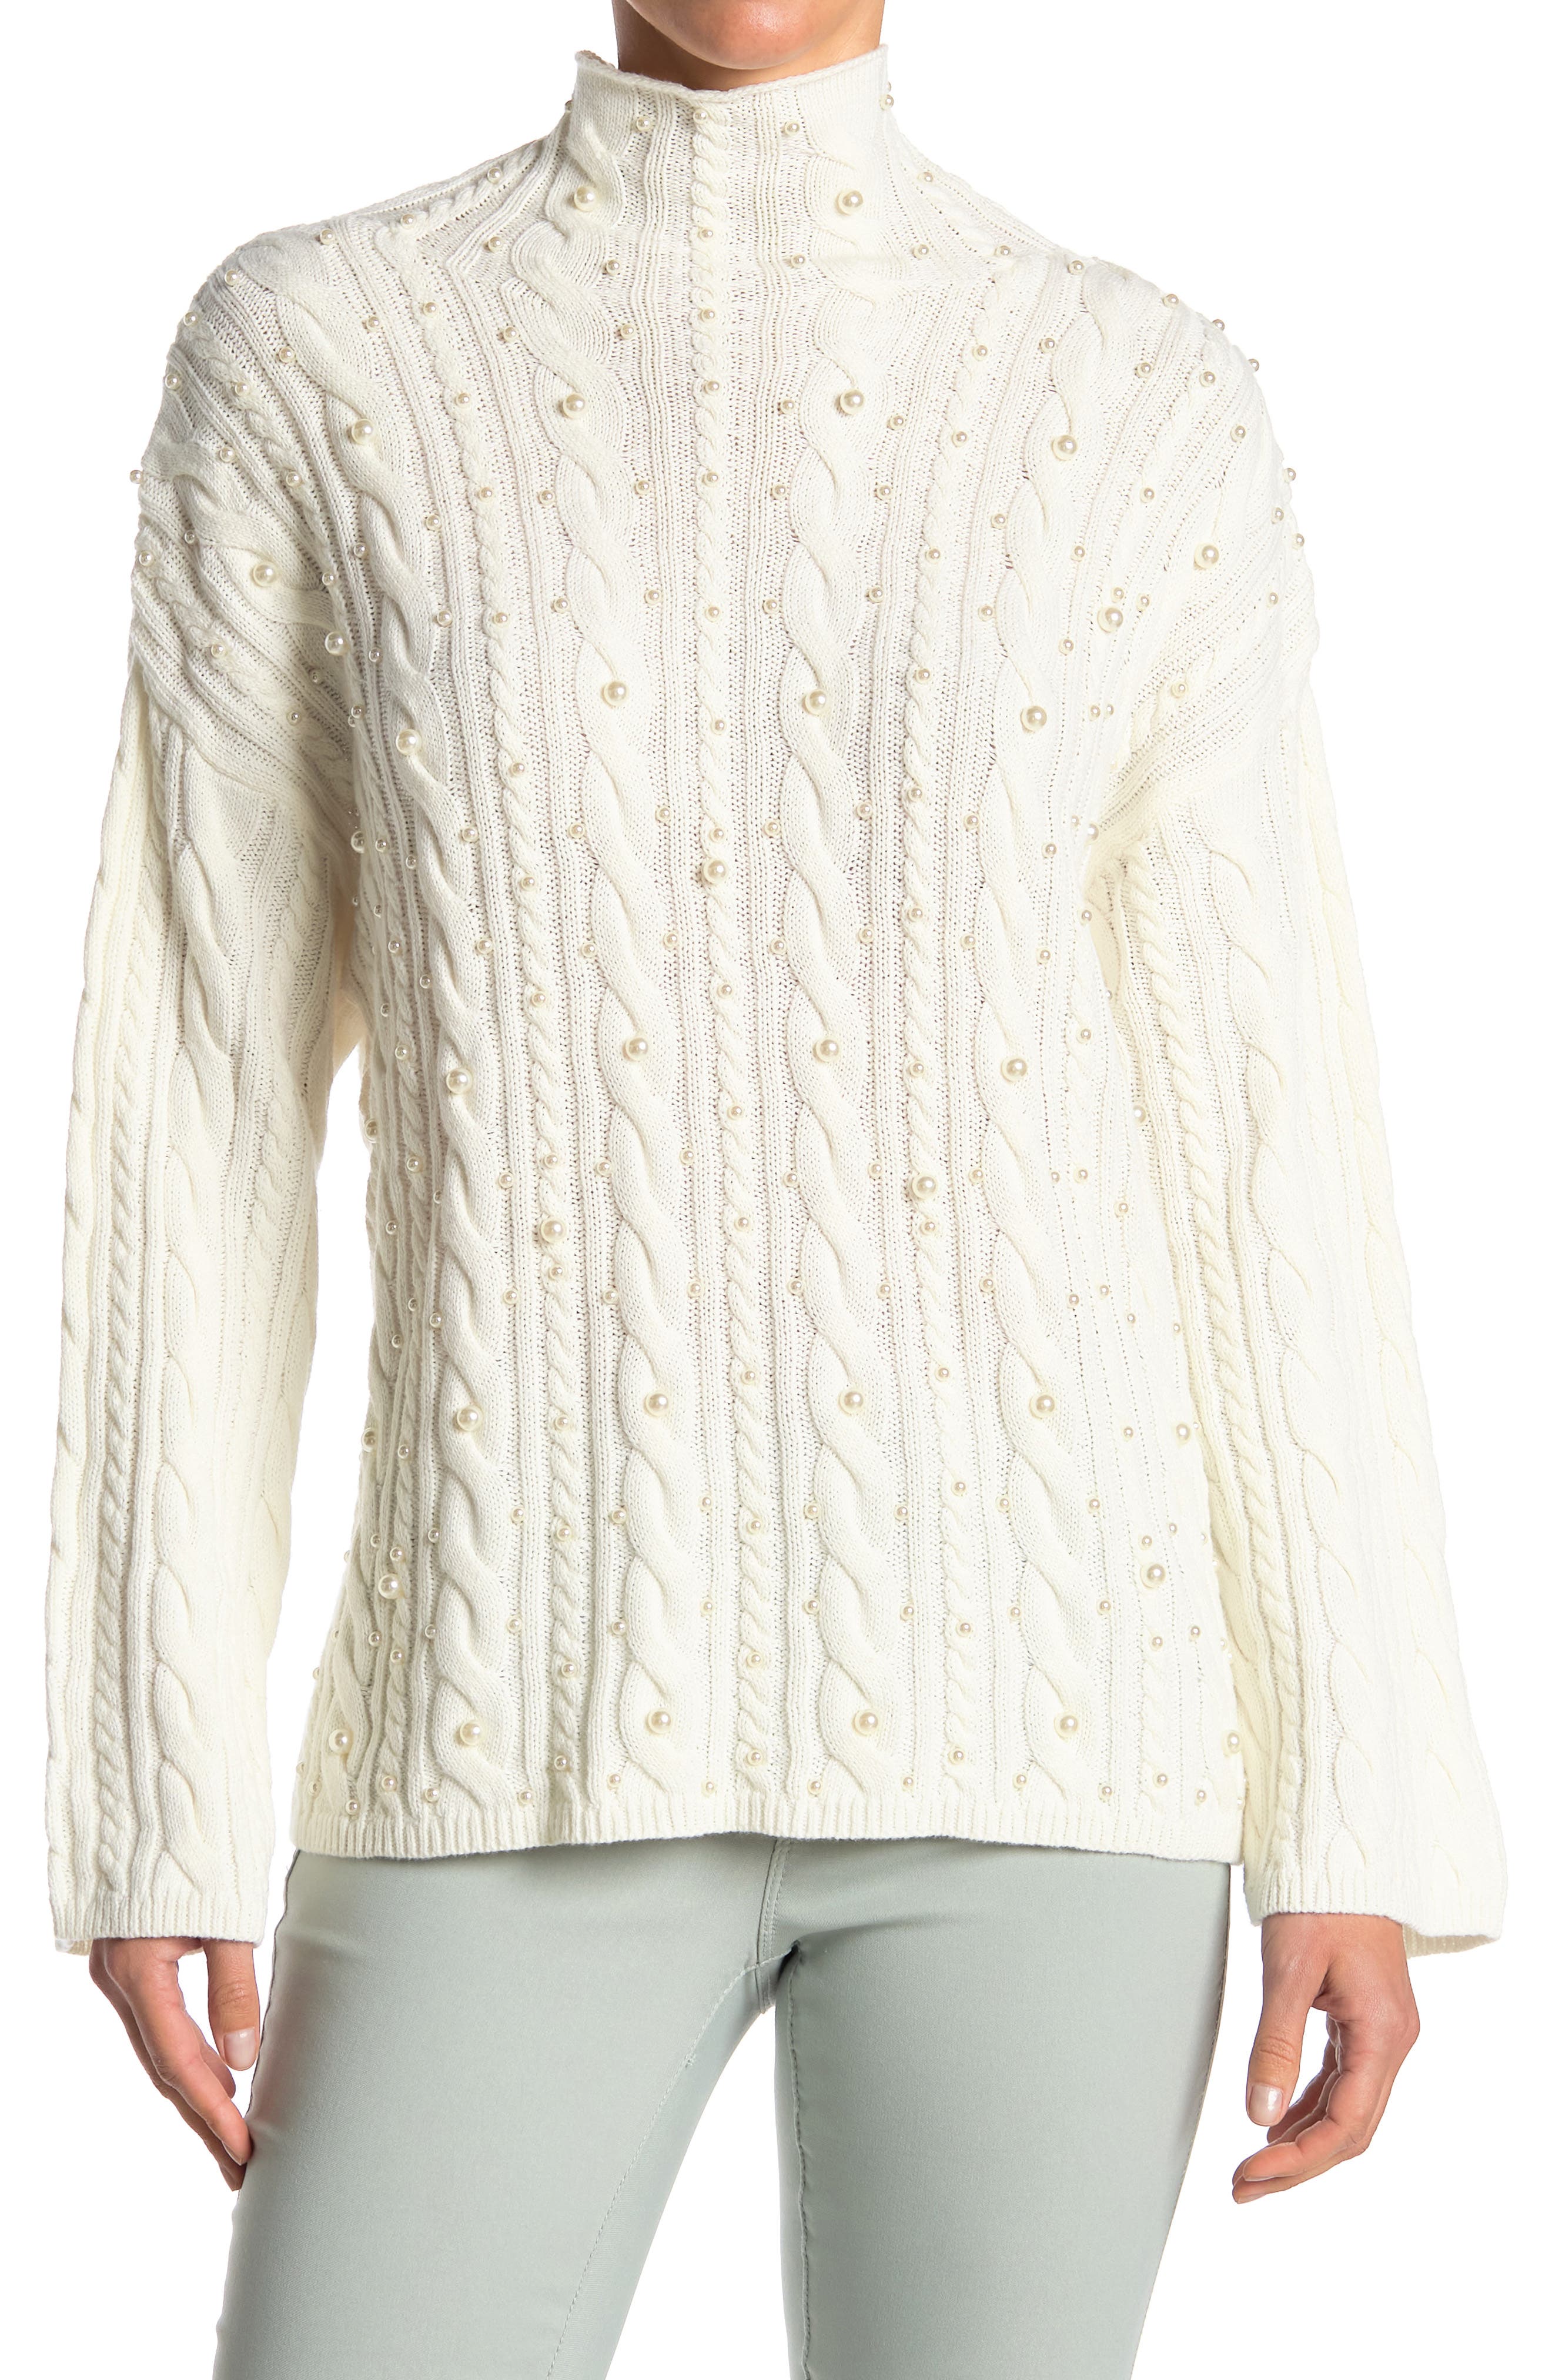 Grace Elements Womens Embellished Cable Hi-Lo Sweater 